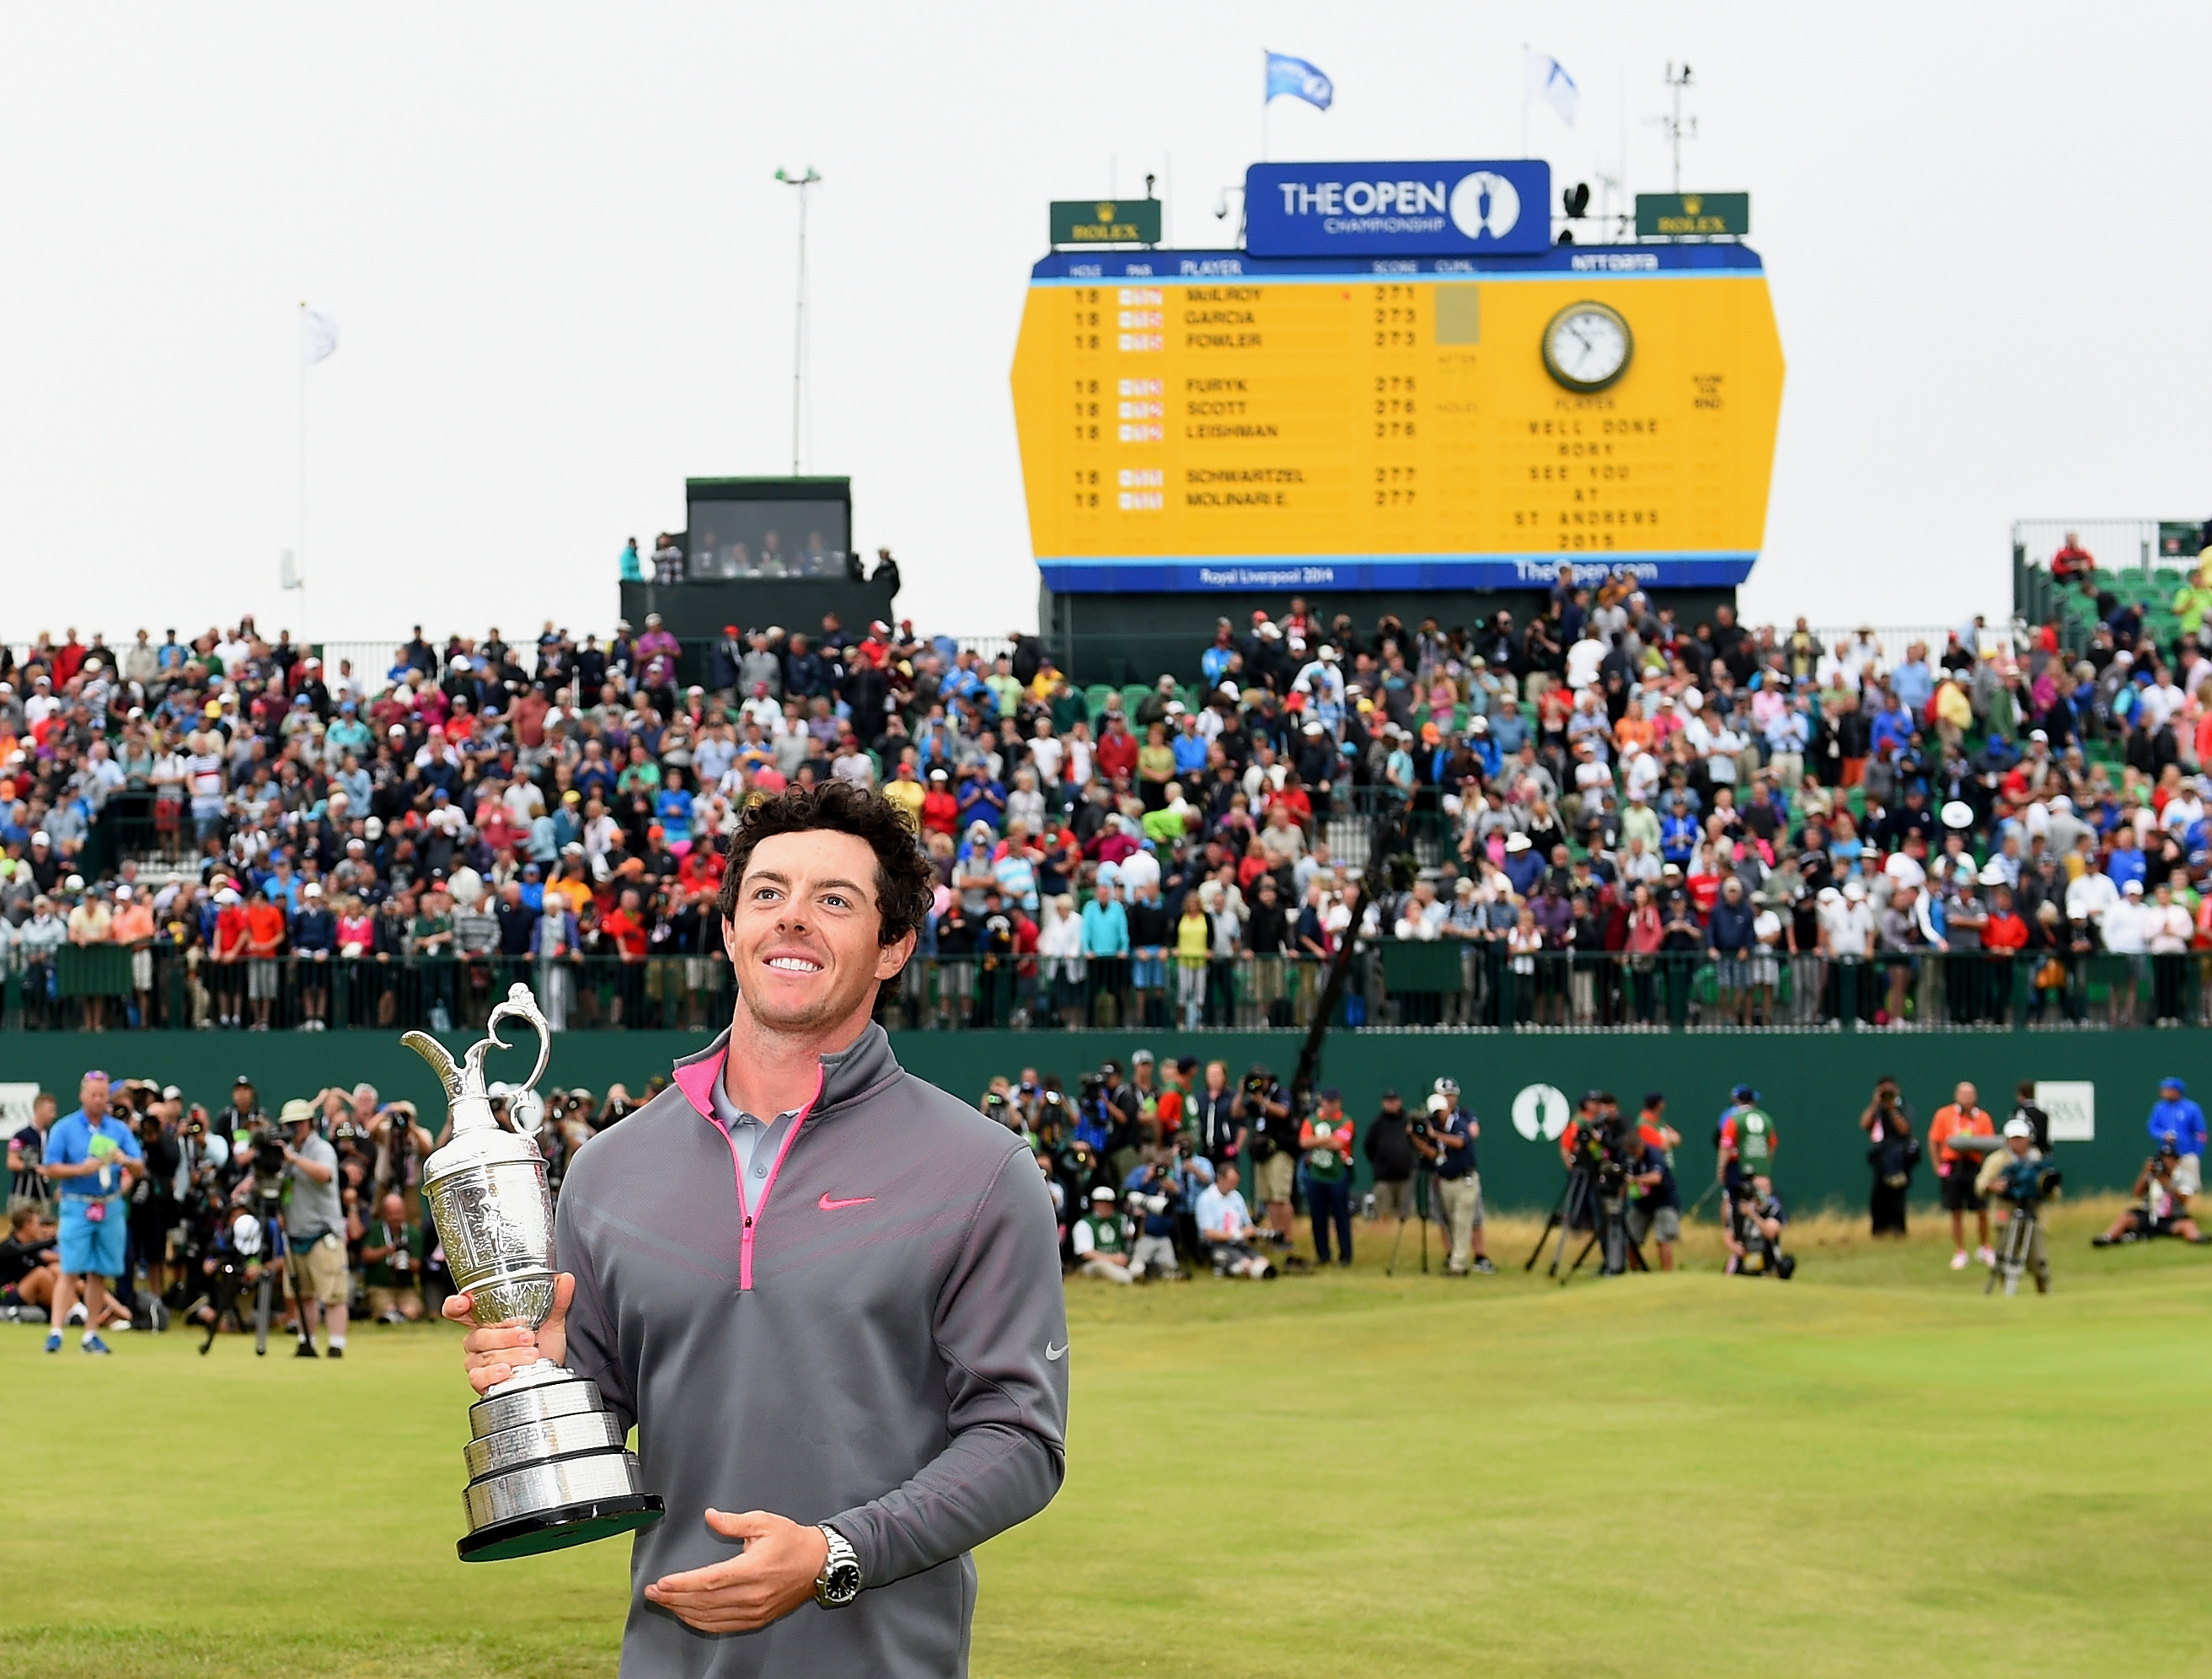 Rory McIlroy celebrates with the Claret Jug after his two-stroke victory after the final round of The 143rd Open Championship at Royal Liverpool on July 20, 2014 in Hoylake, England. (Photo by Ross Kinnaird/R&A/R&A via Getty Images)